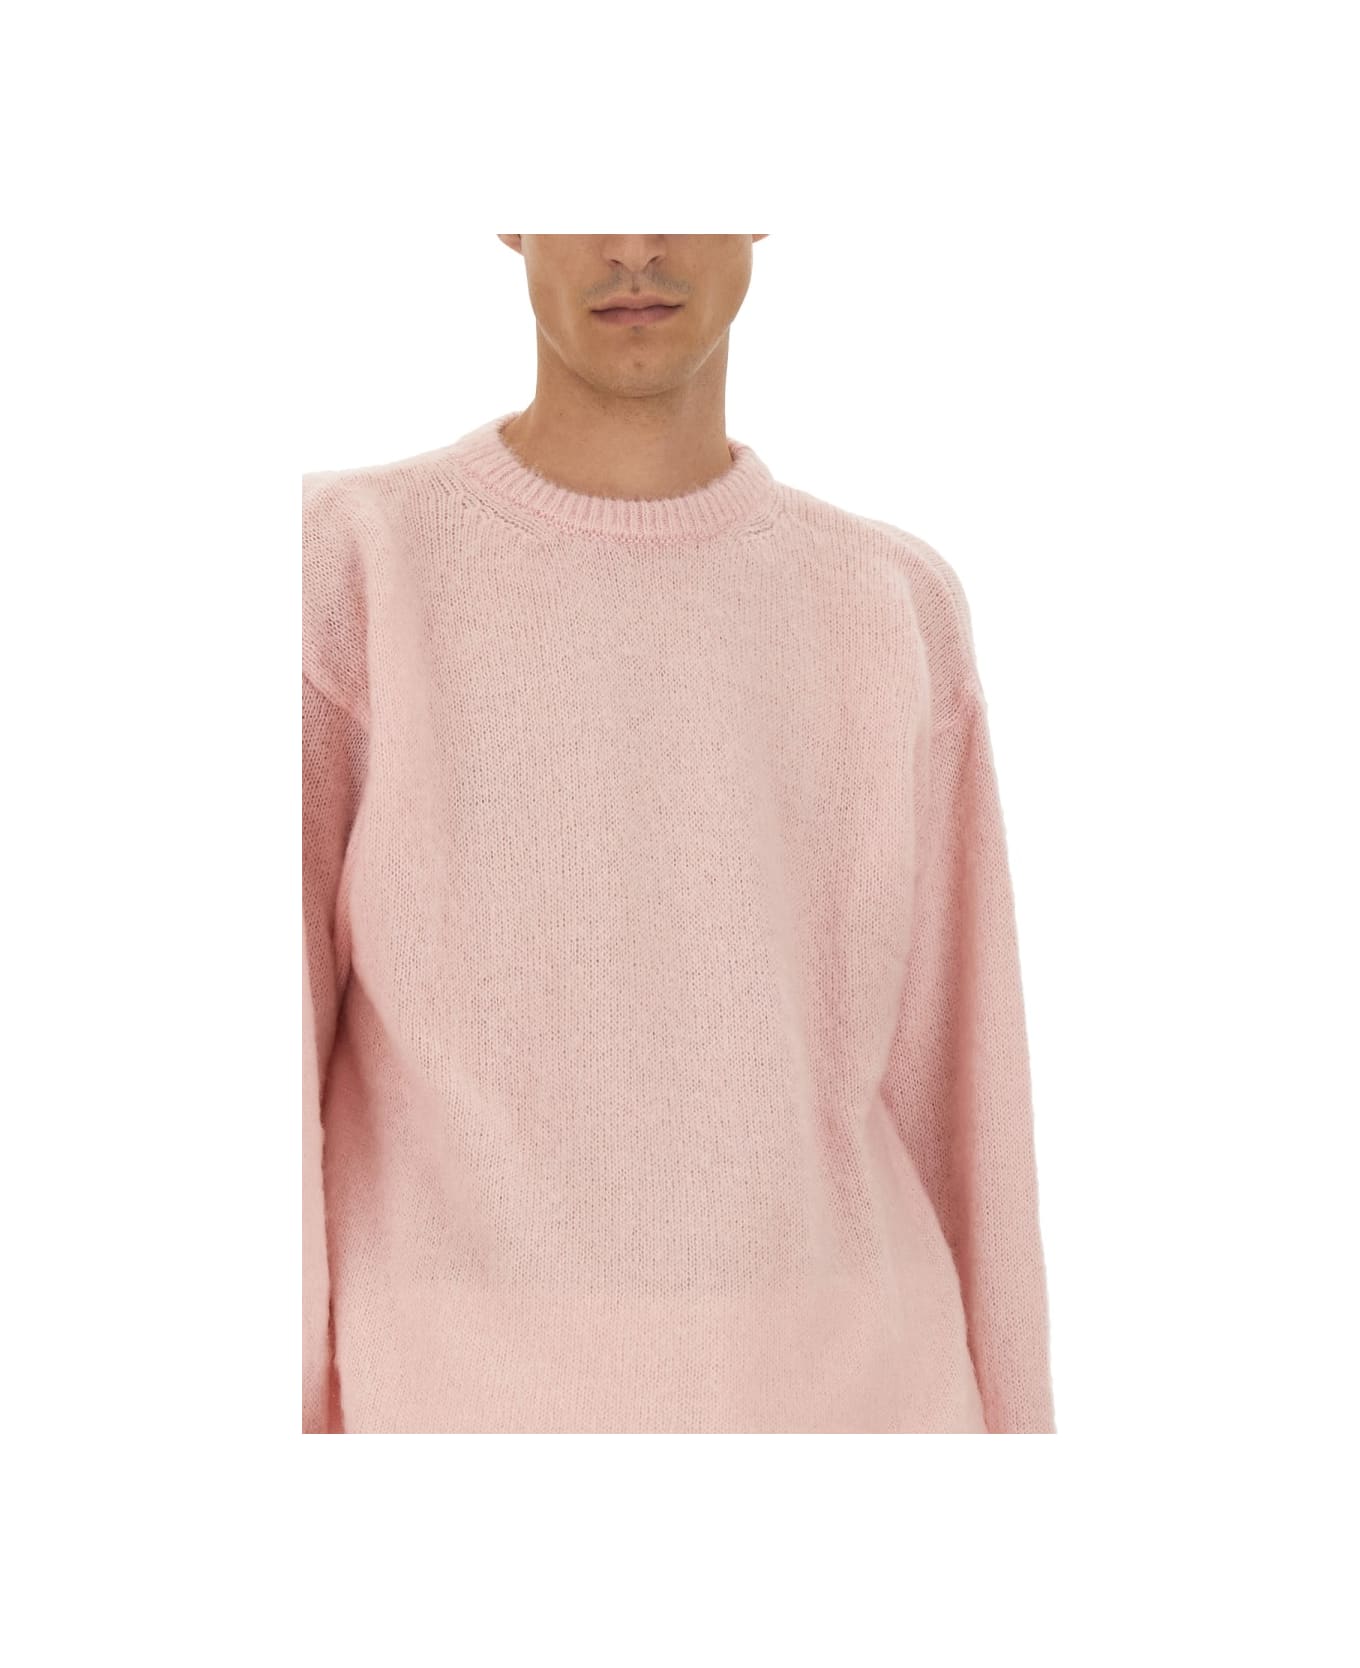 Family First Milano Mohair Sweater - PINK ニットウェア